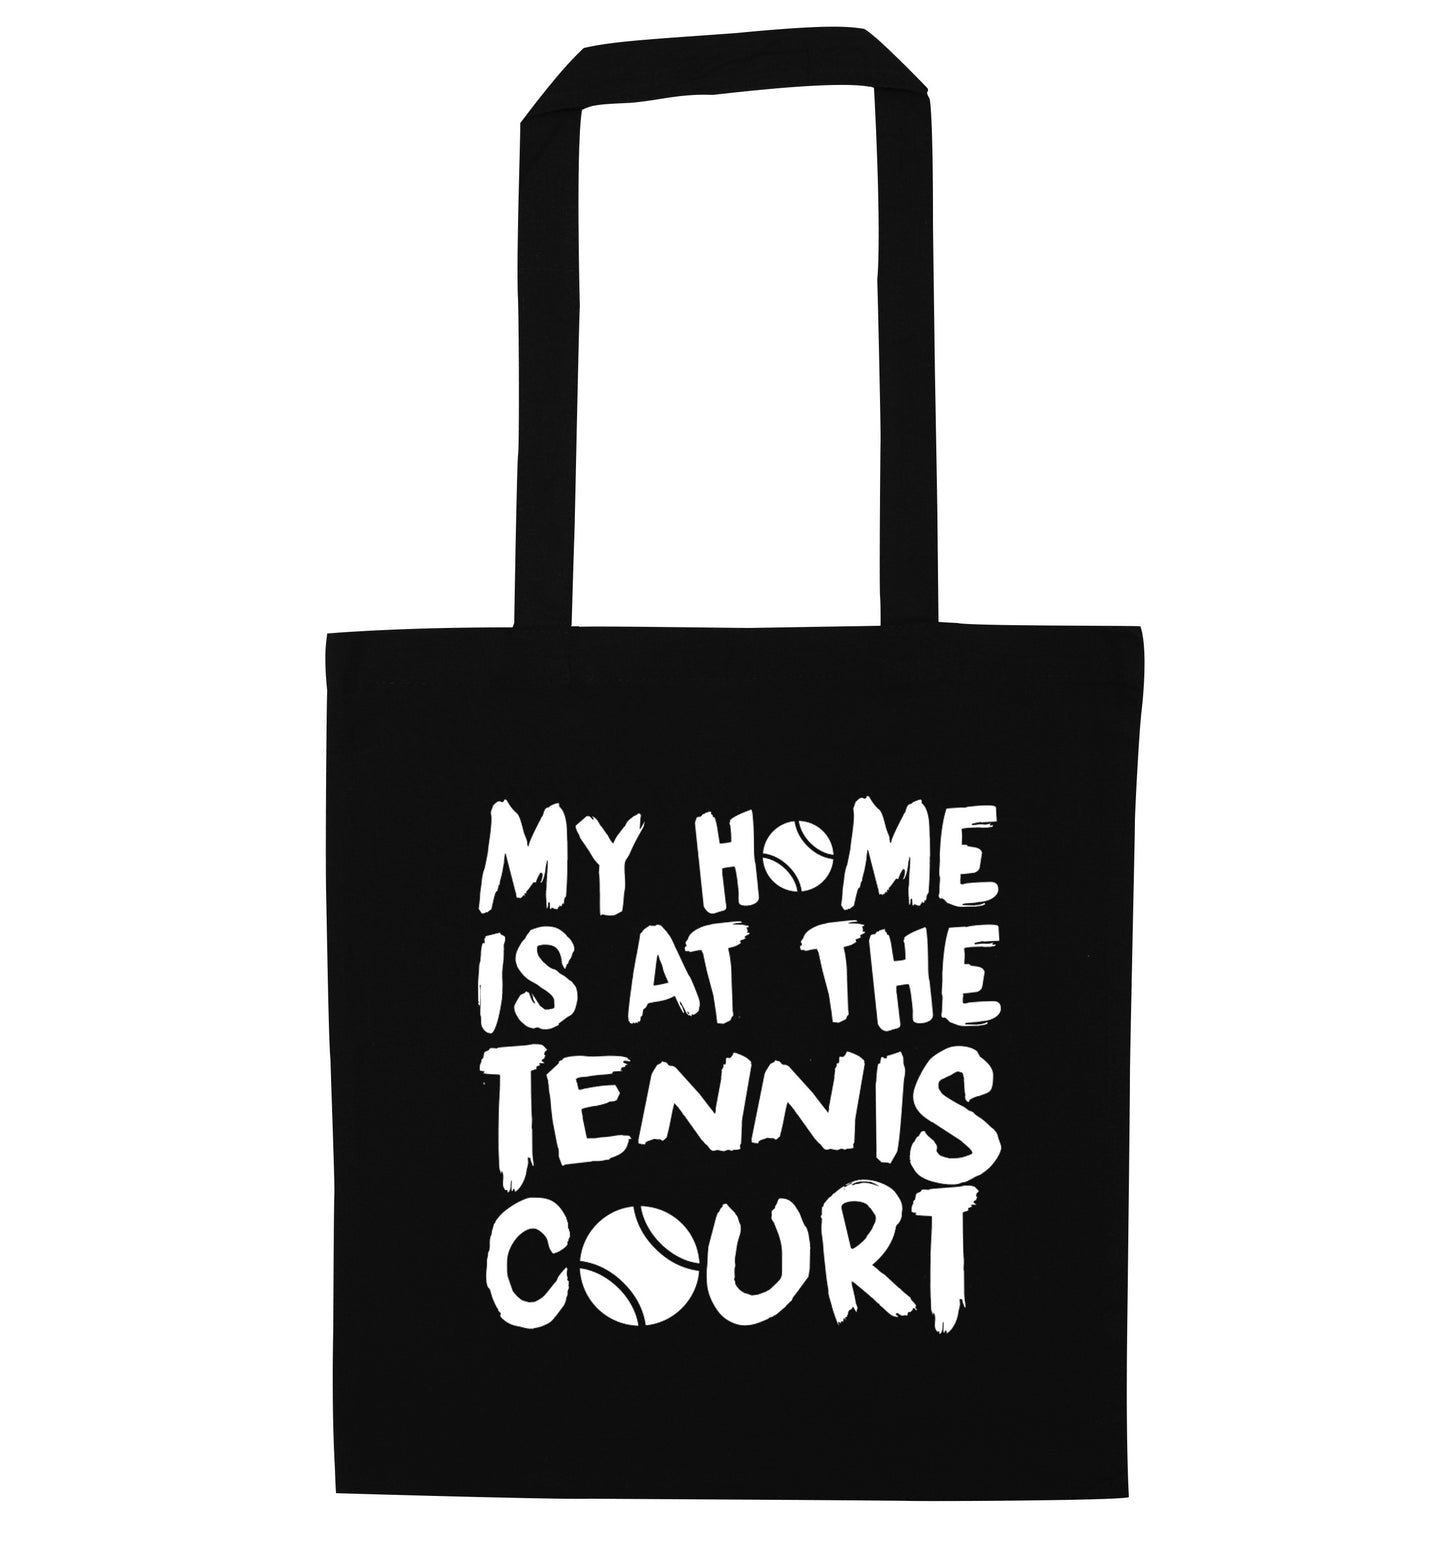 My home is at the tennis court black tote bag